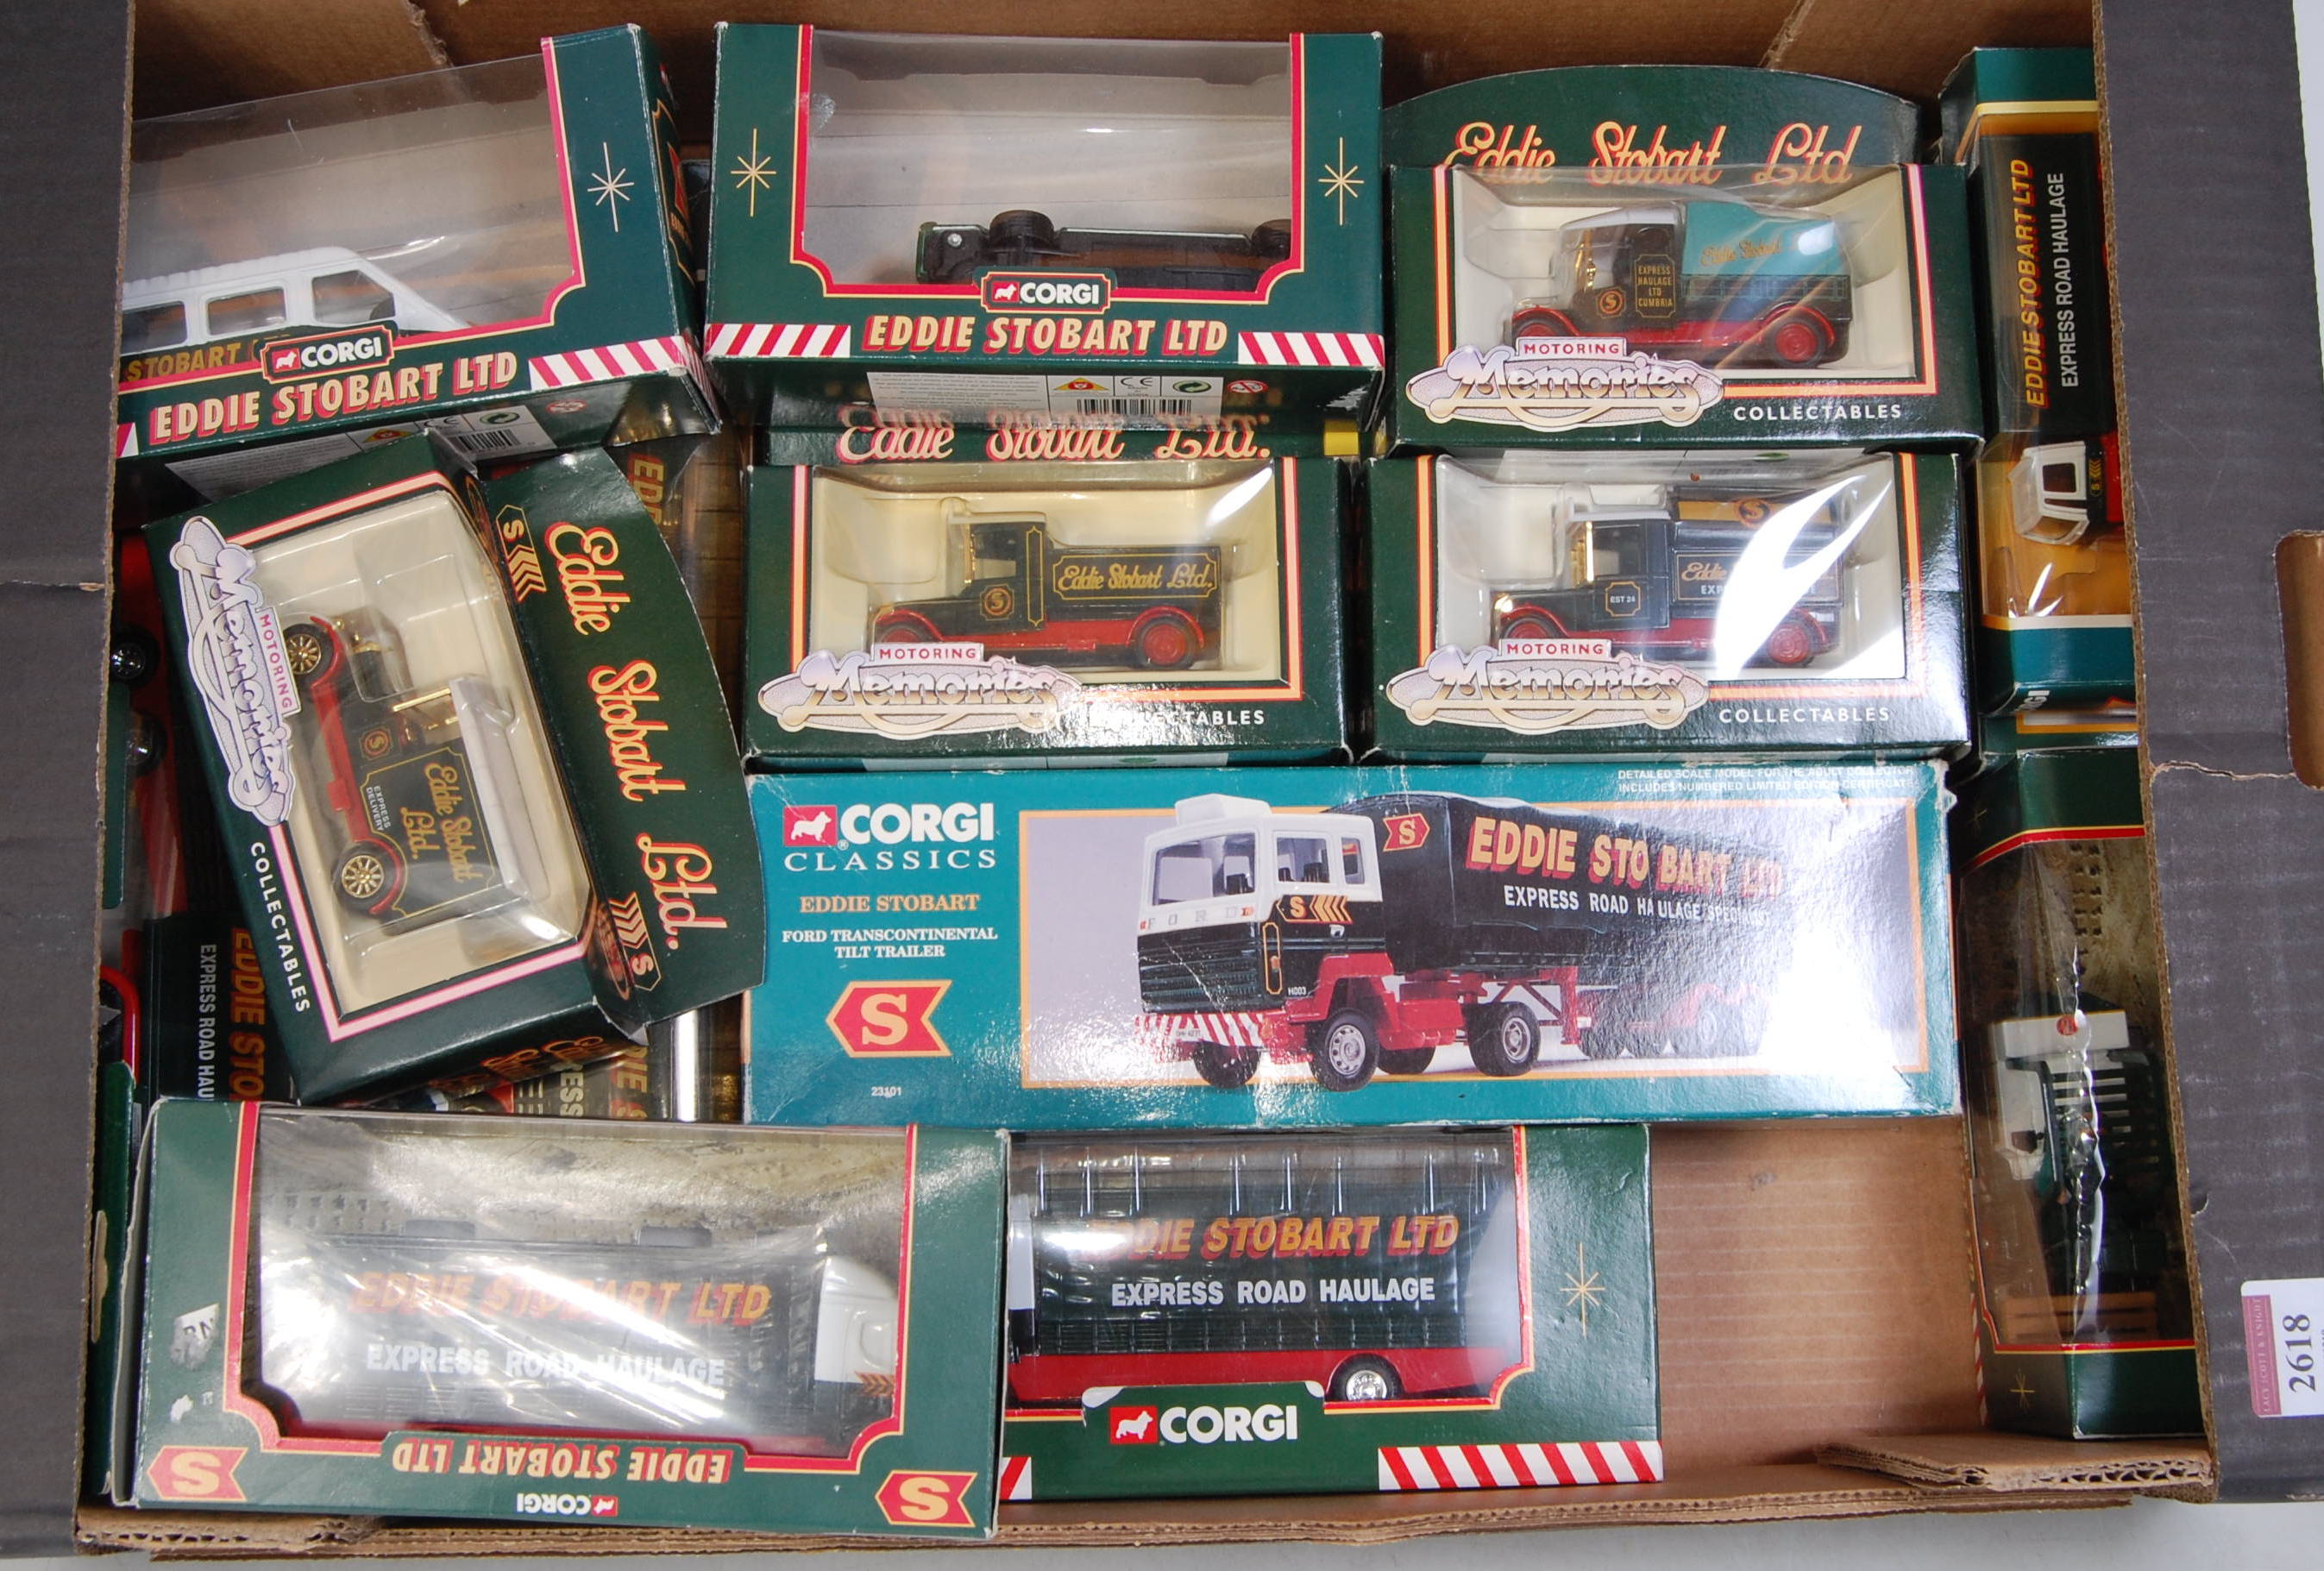 16 various boxed Corgi and Vanguards Eddie Stobart related diecasts, to include an Eddie Stobart